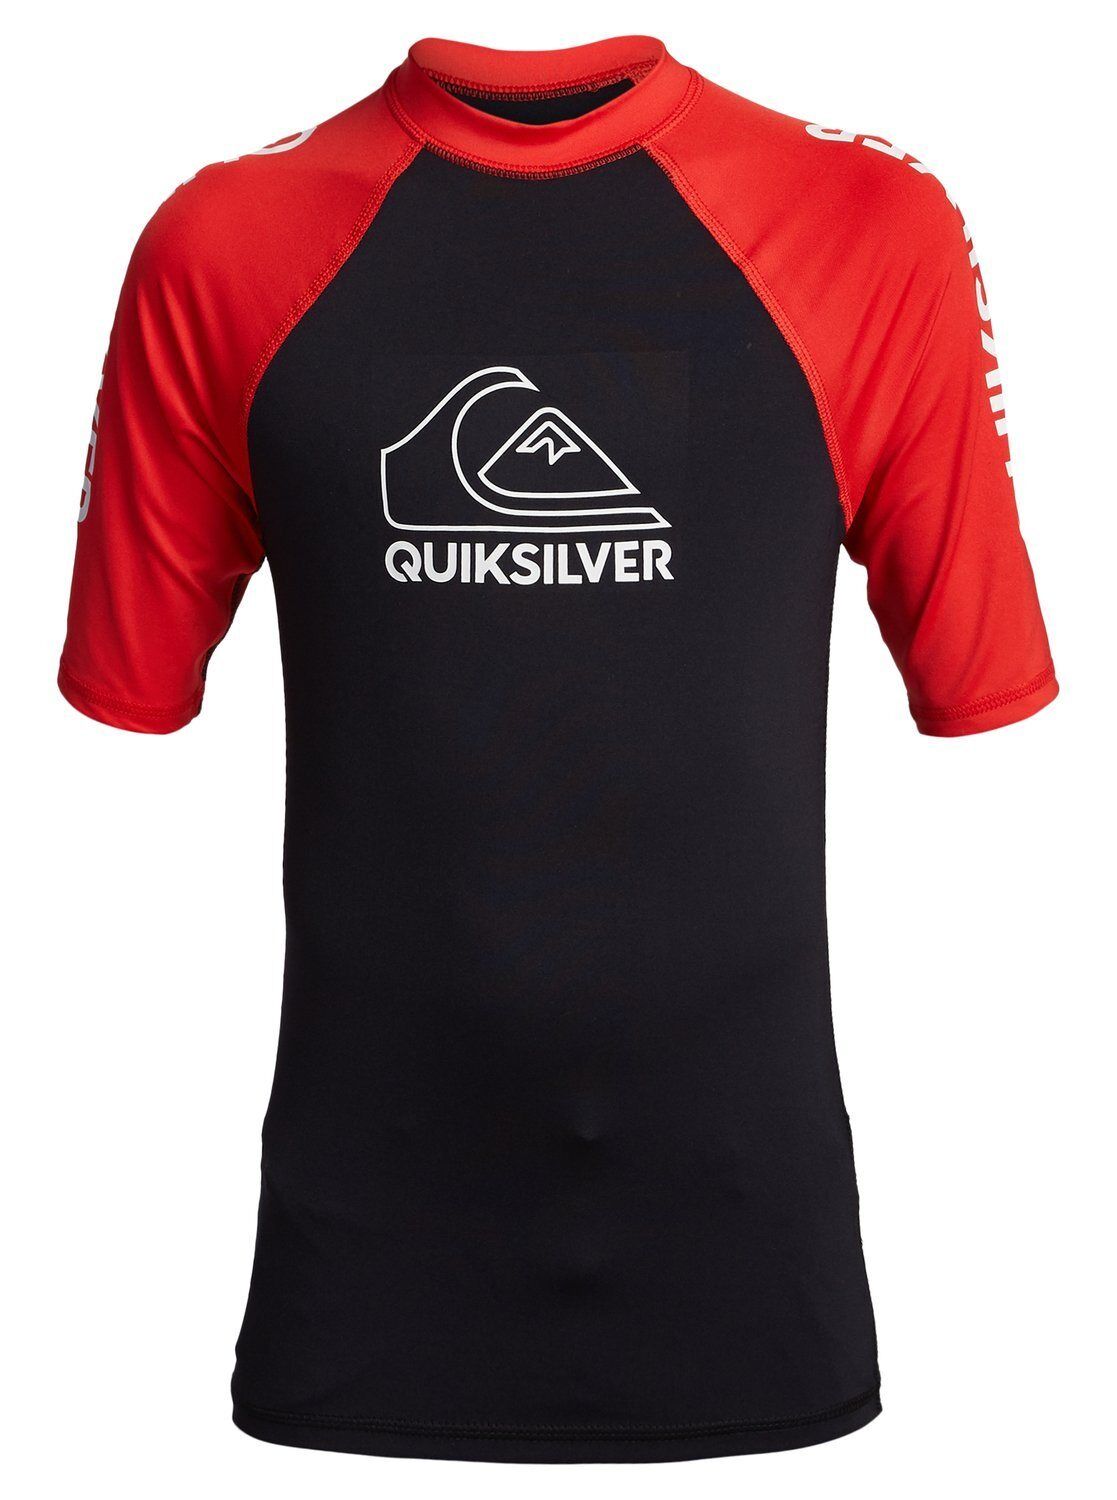 Quiksilver Funktionsshirt »On Tour«, rot